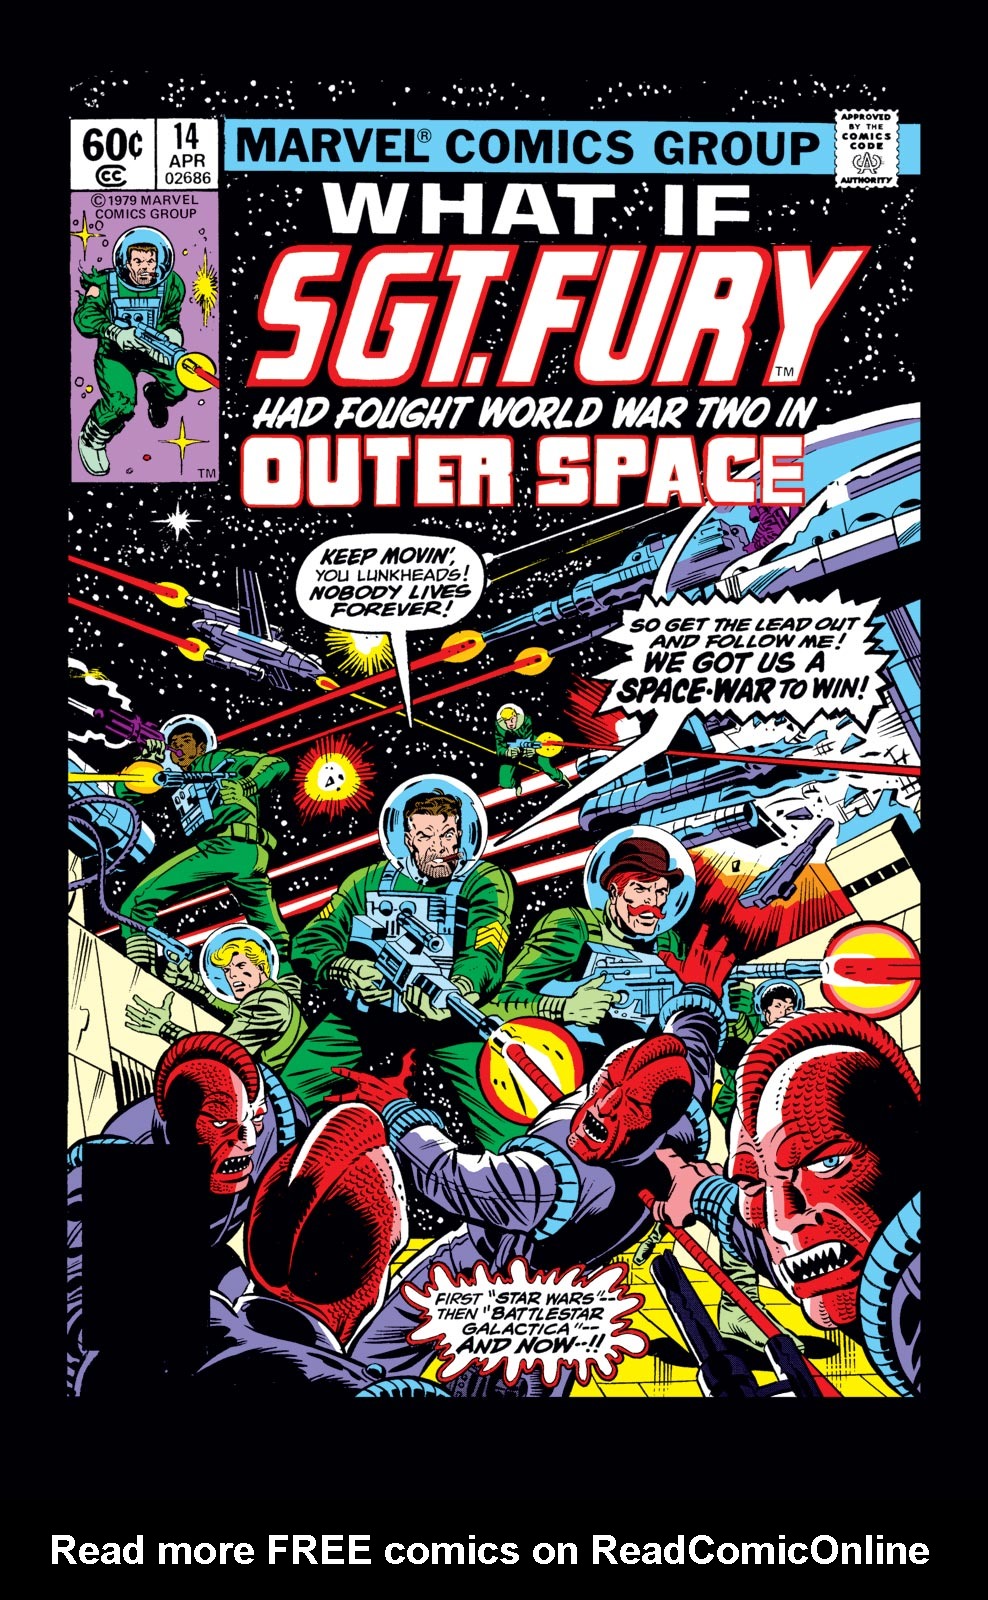 Read online What If? (1977) comic -  Issue #14 - Sgt. Fury had Fought WWII in Outer Space - 1